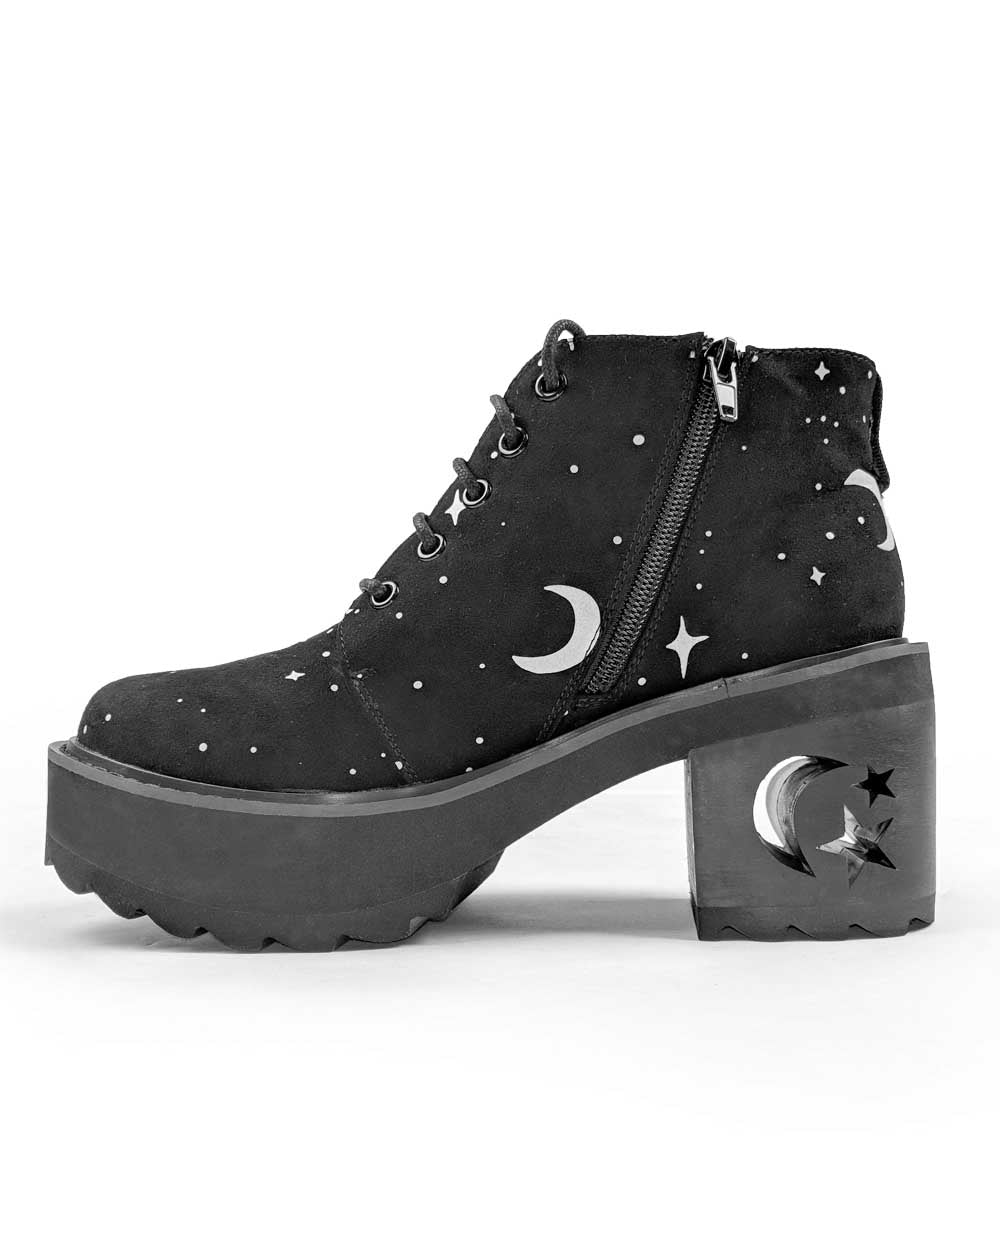 MoonDust Boots - Luxurious Quality Vegan Suede Goth Shoes with Moons & Stars, Witchy Alt Style, Occult Grunge Aesthetic, Soft Memory foam inner panels!